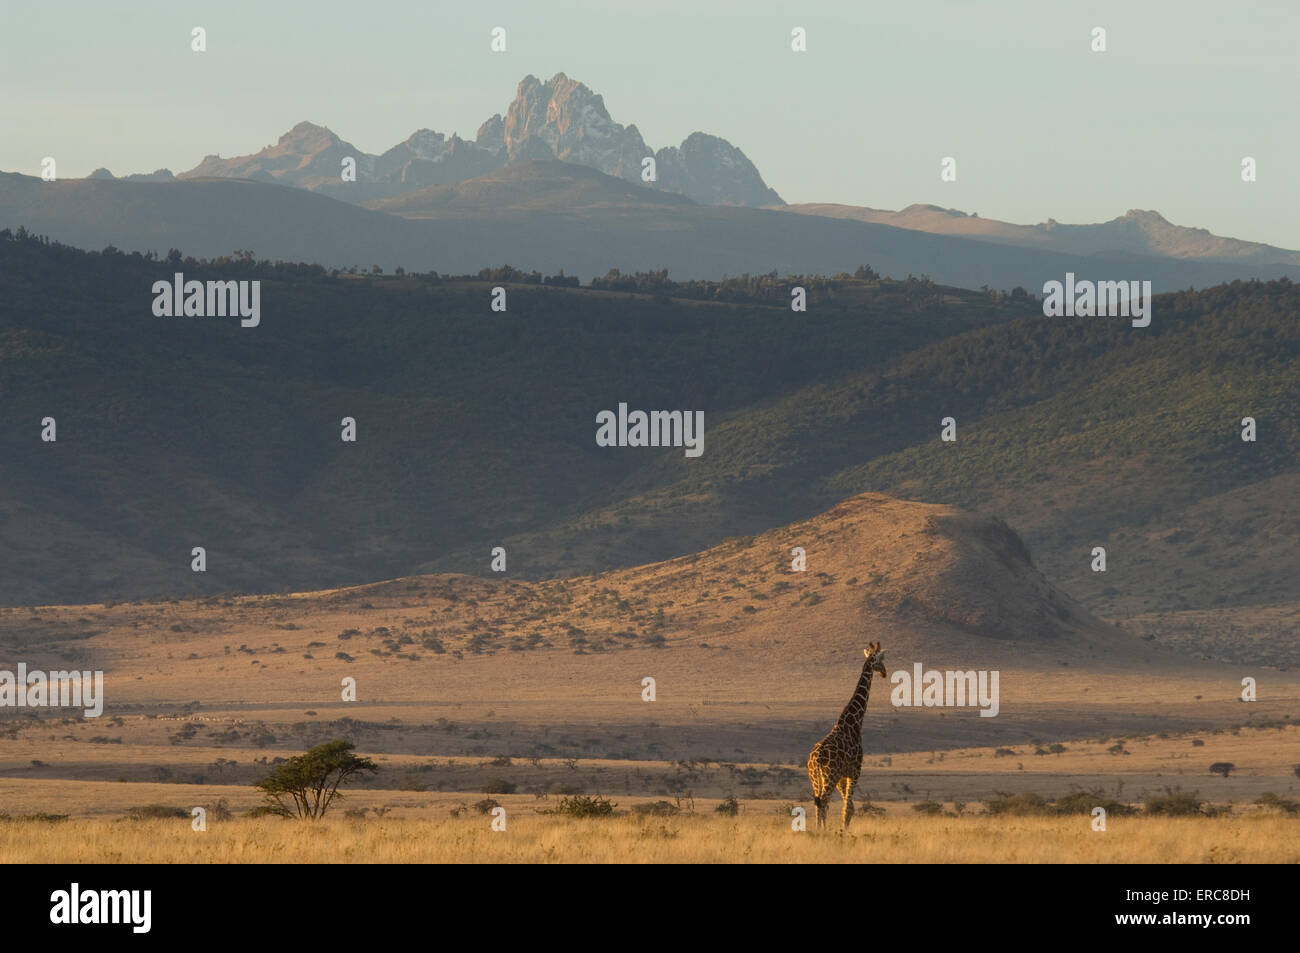 SINGLE RETICULATED GIRAFFE IN PLAINS EARLY AM WITH MT. KENYA IN BACKGROUND Stock Photo